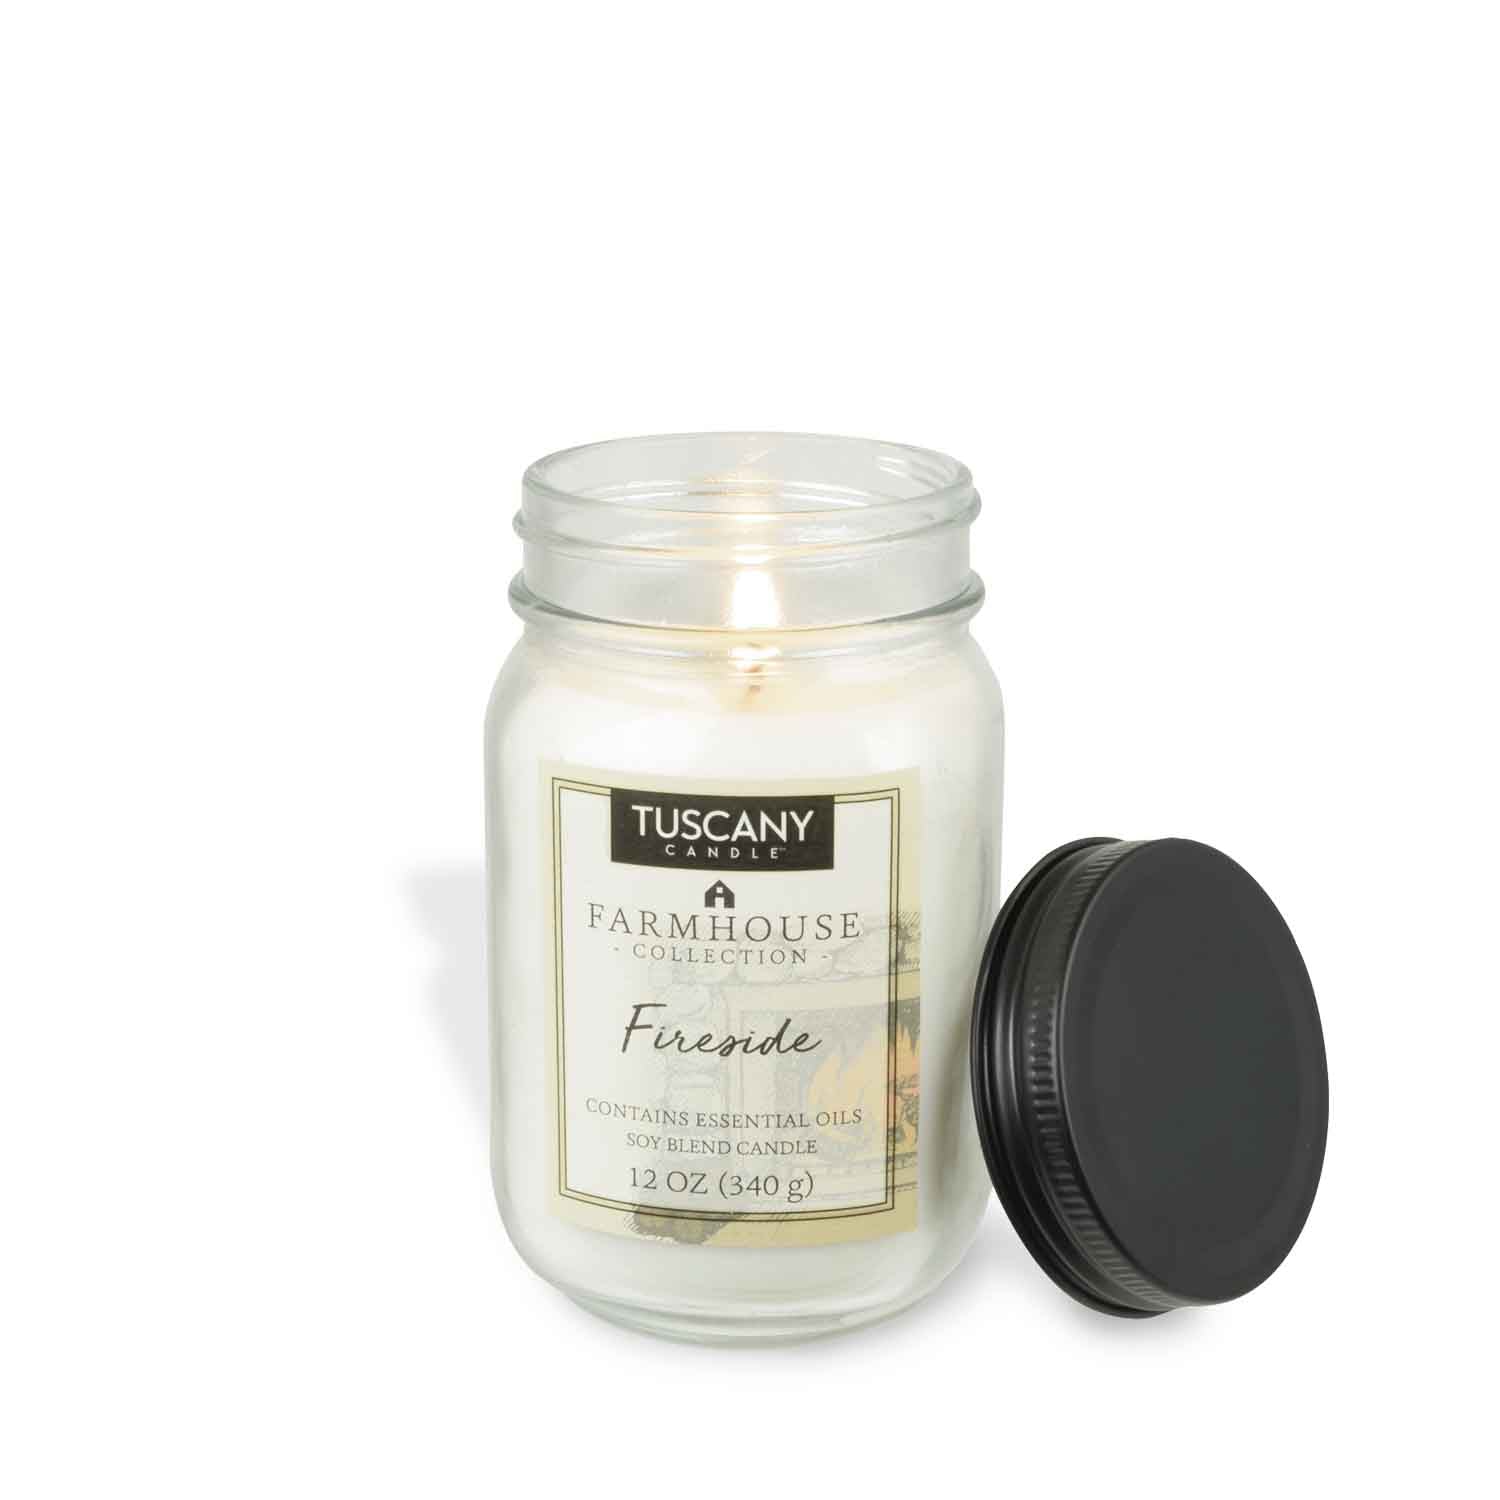 A Fireside Scented Jar Candle (12 oz) in a Tuscany Candle mason jar with a black lid, adding a rustic touch to our farmhouse collection.